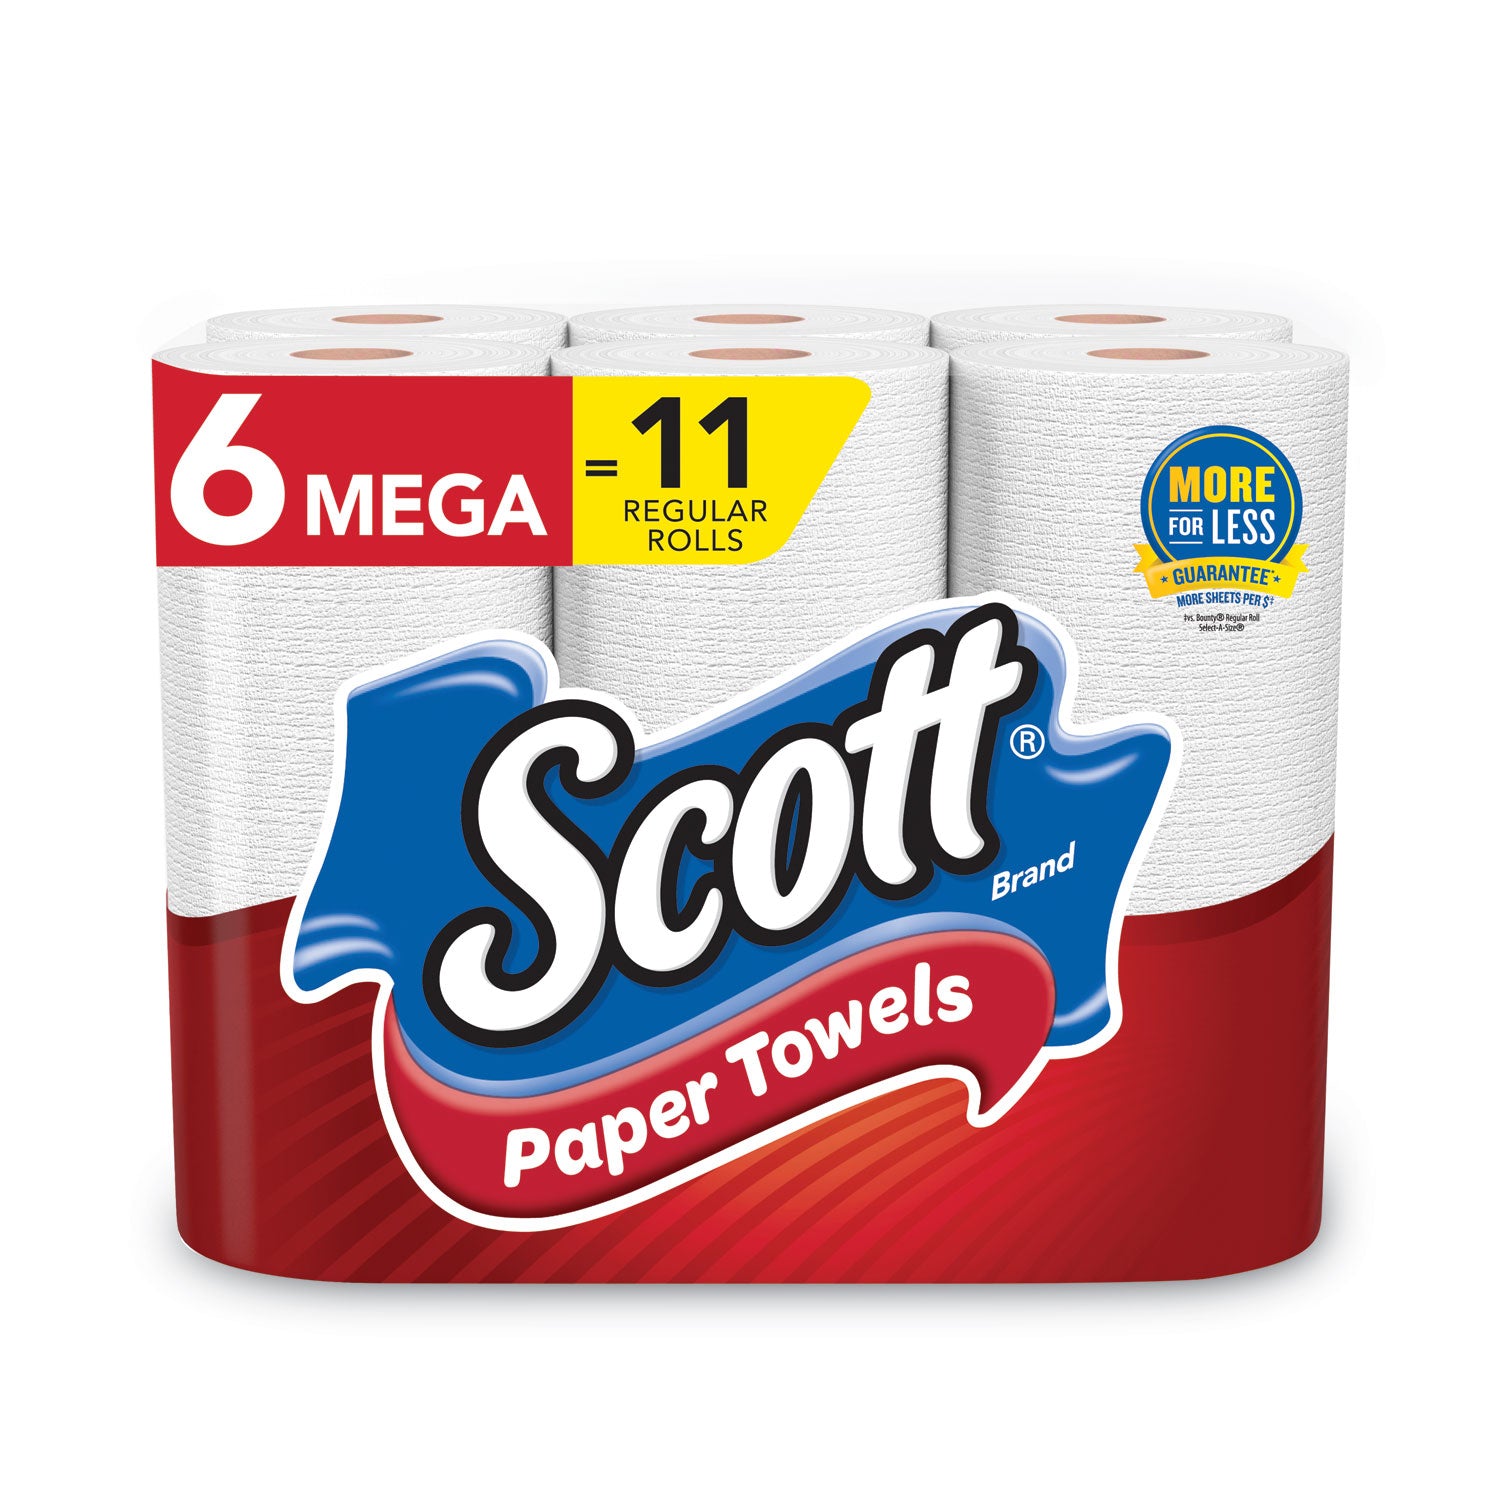 choose-a-size-mega-kitchen-roll-paper-towels-1-ply-100-roll-6-rolls-pack-4-packs-carton_kcc55413 - 1